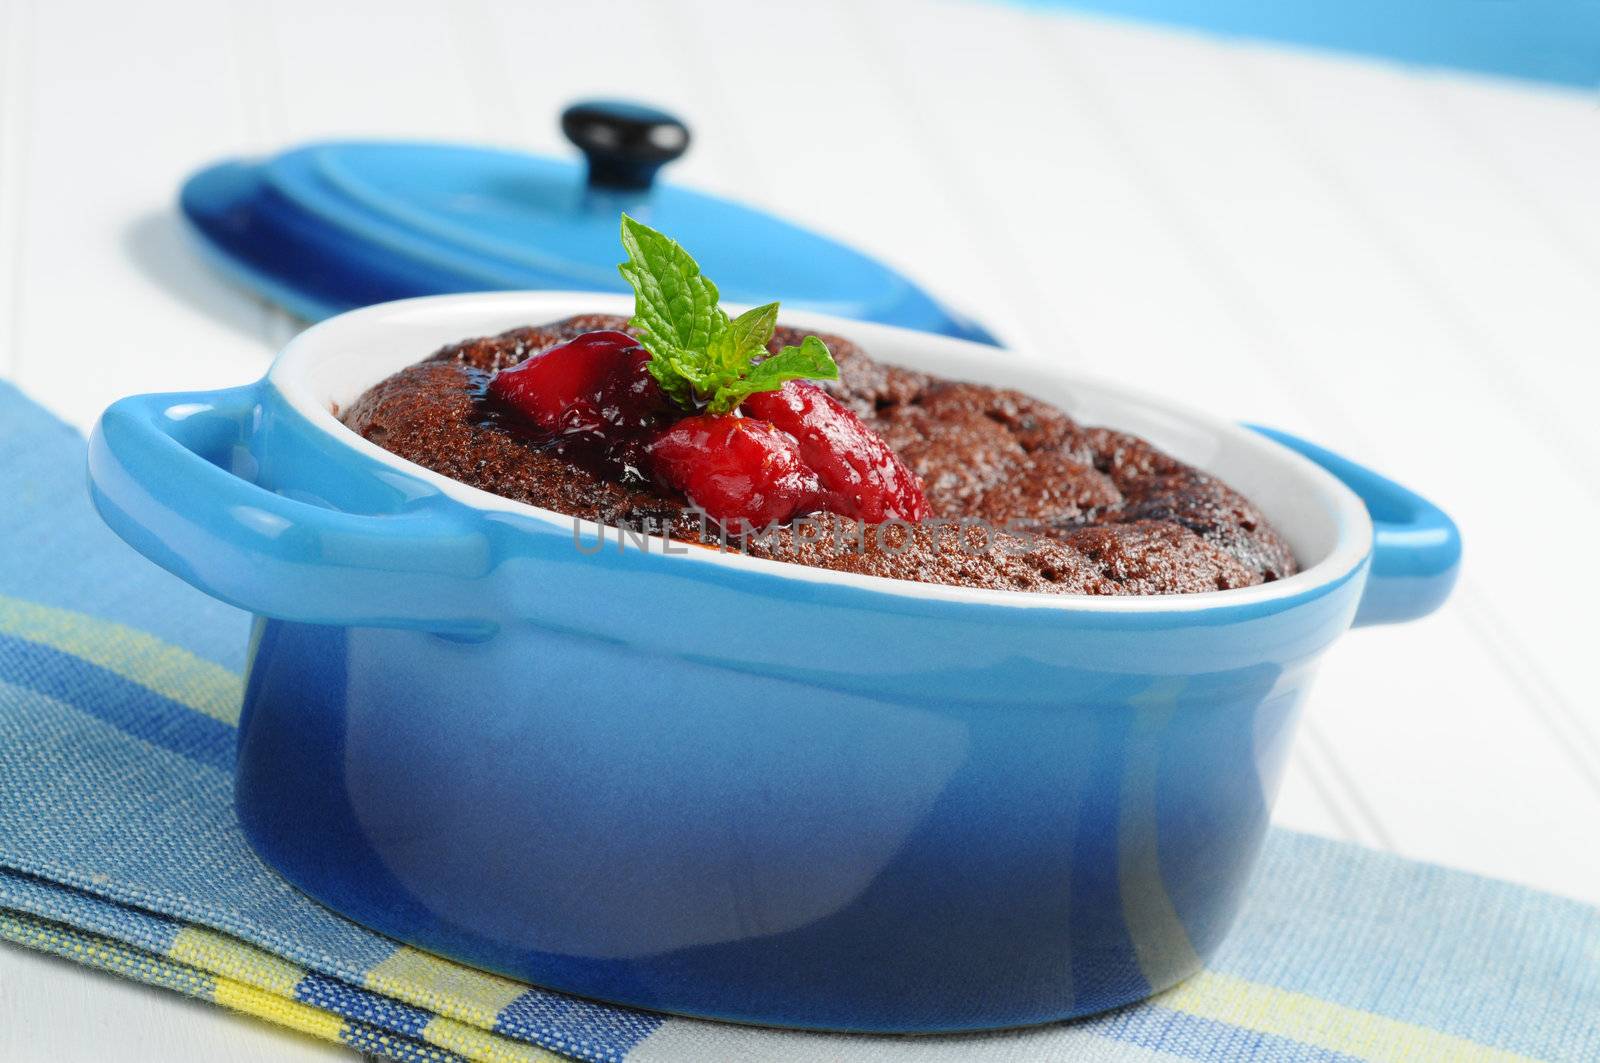 Delicious warm molten lava cake with berries.